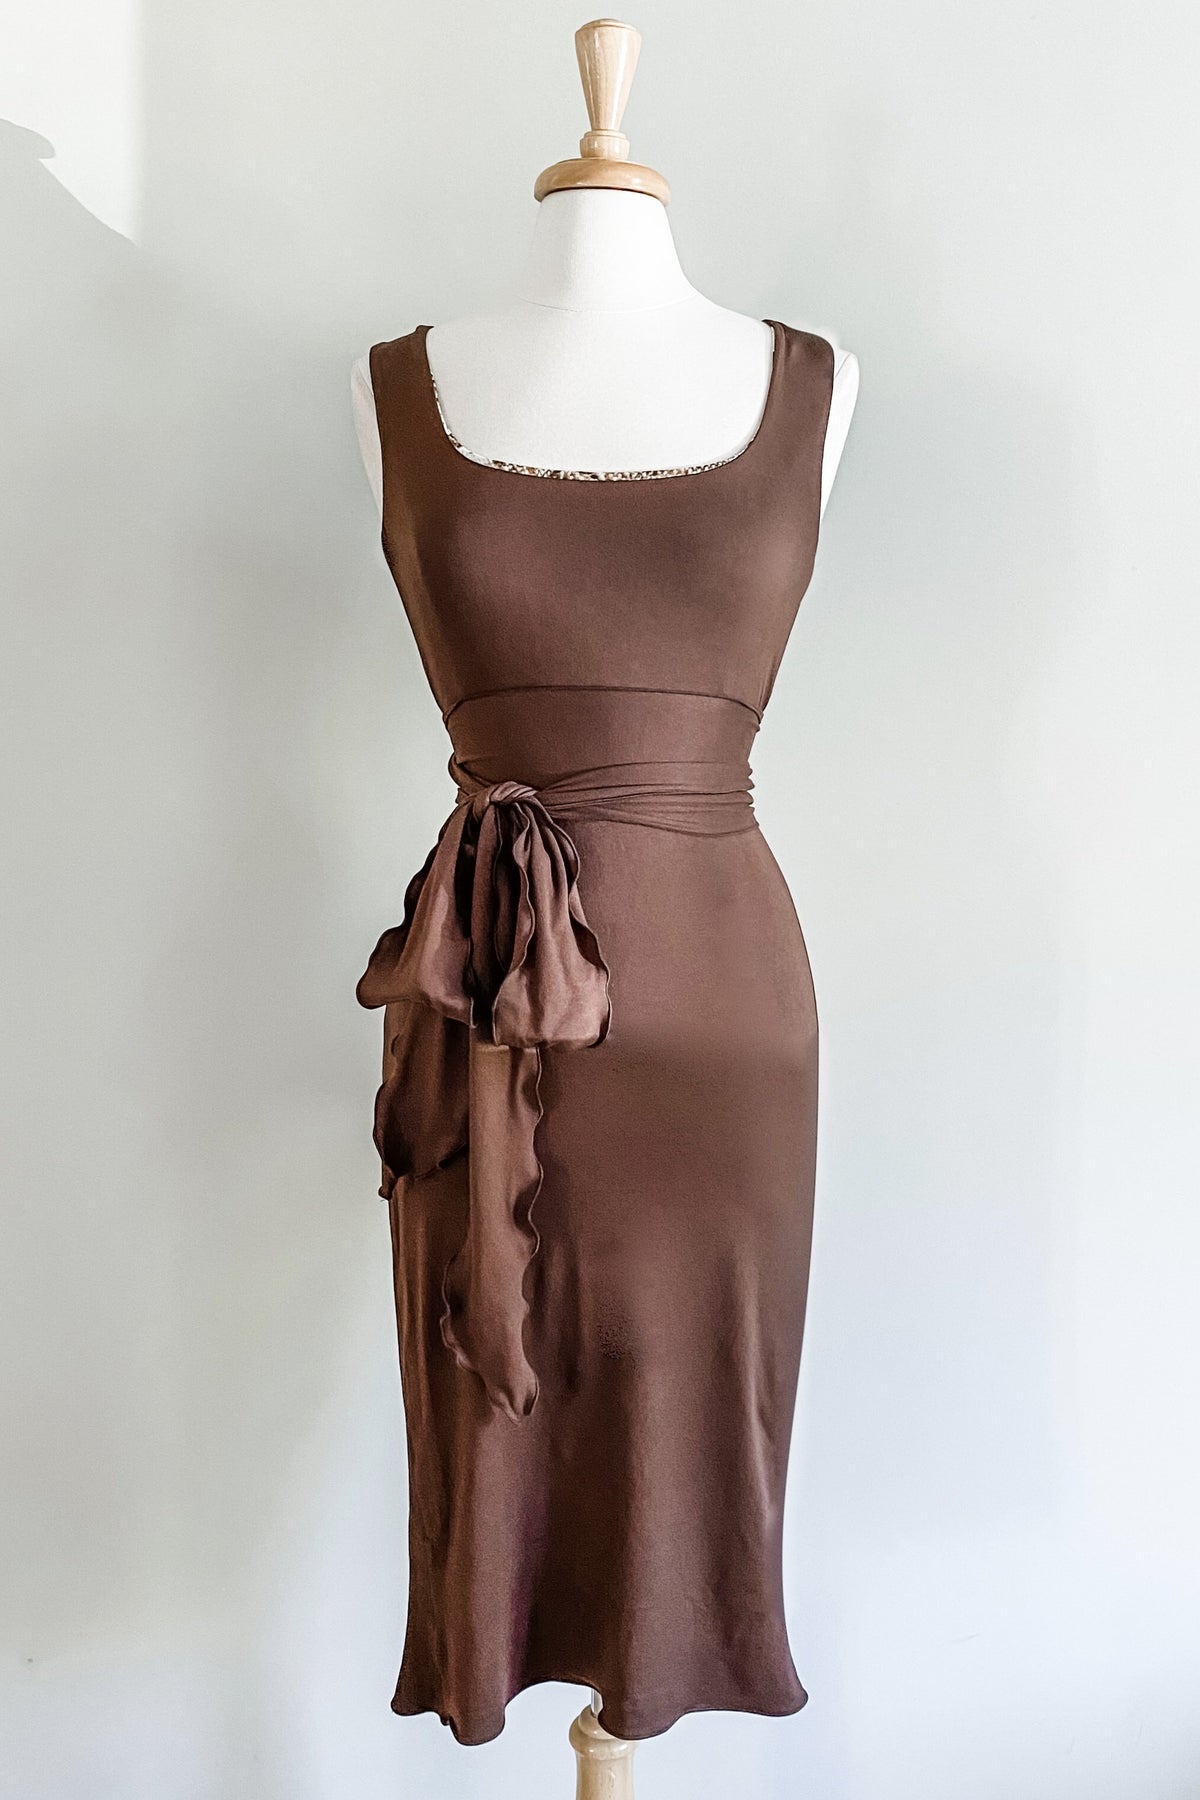 Sheath Dress in Brown Color